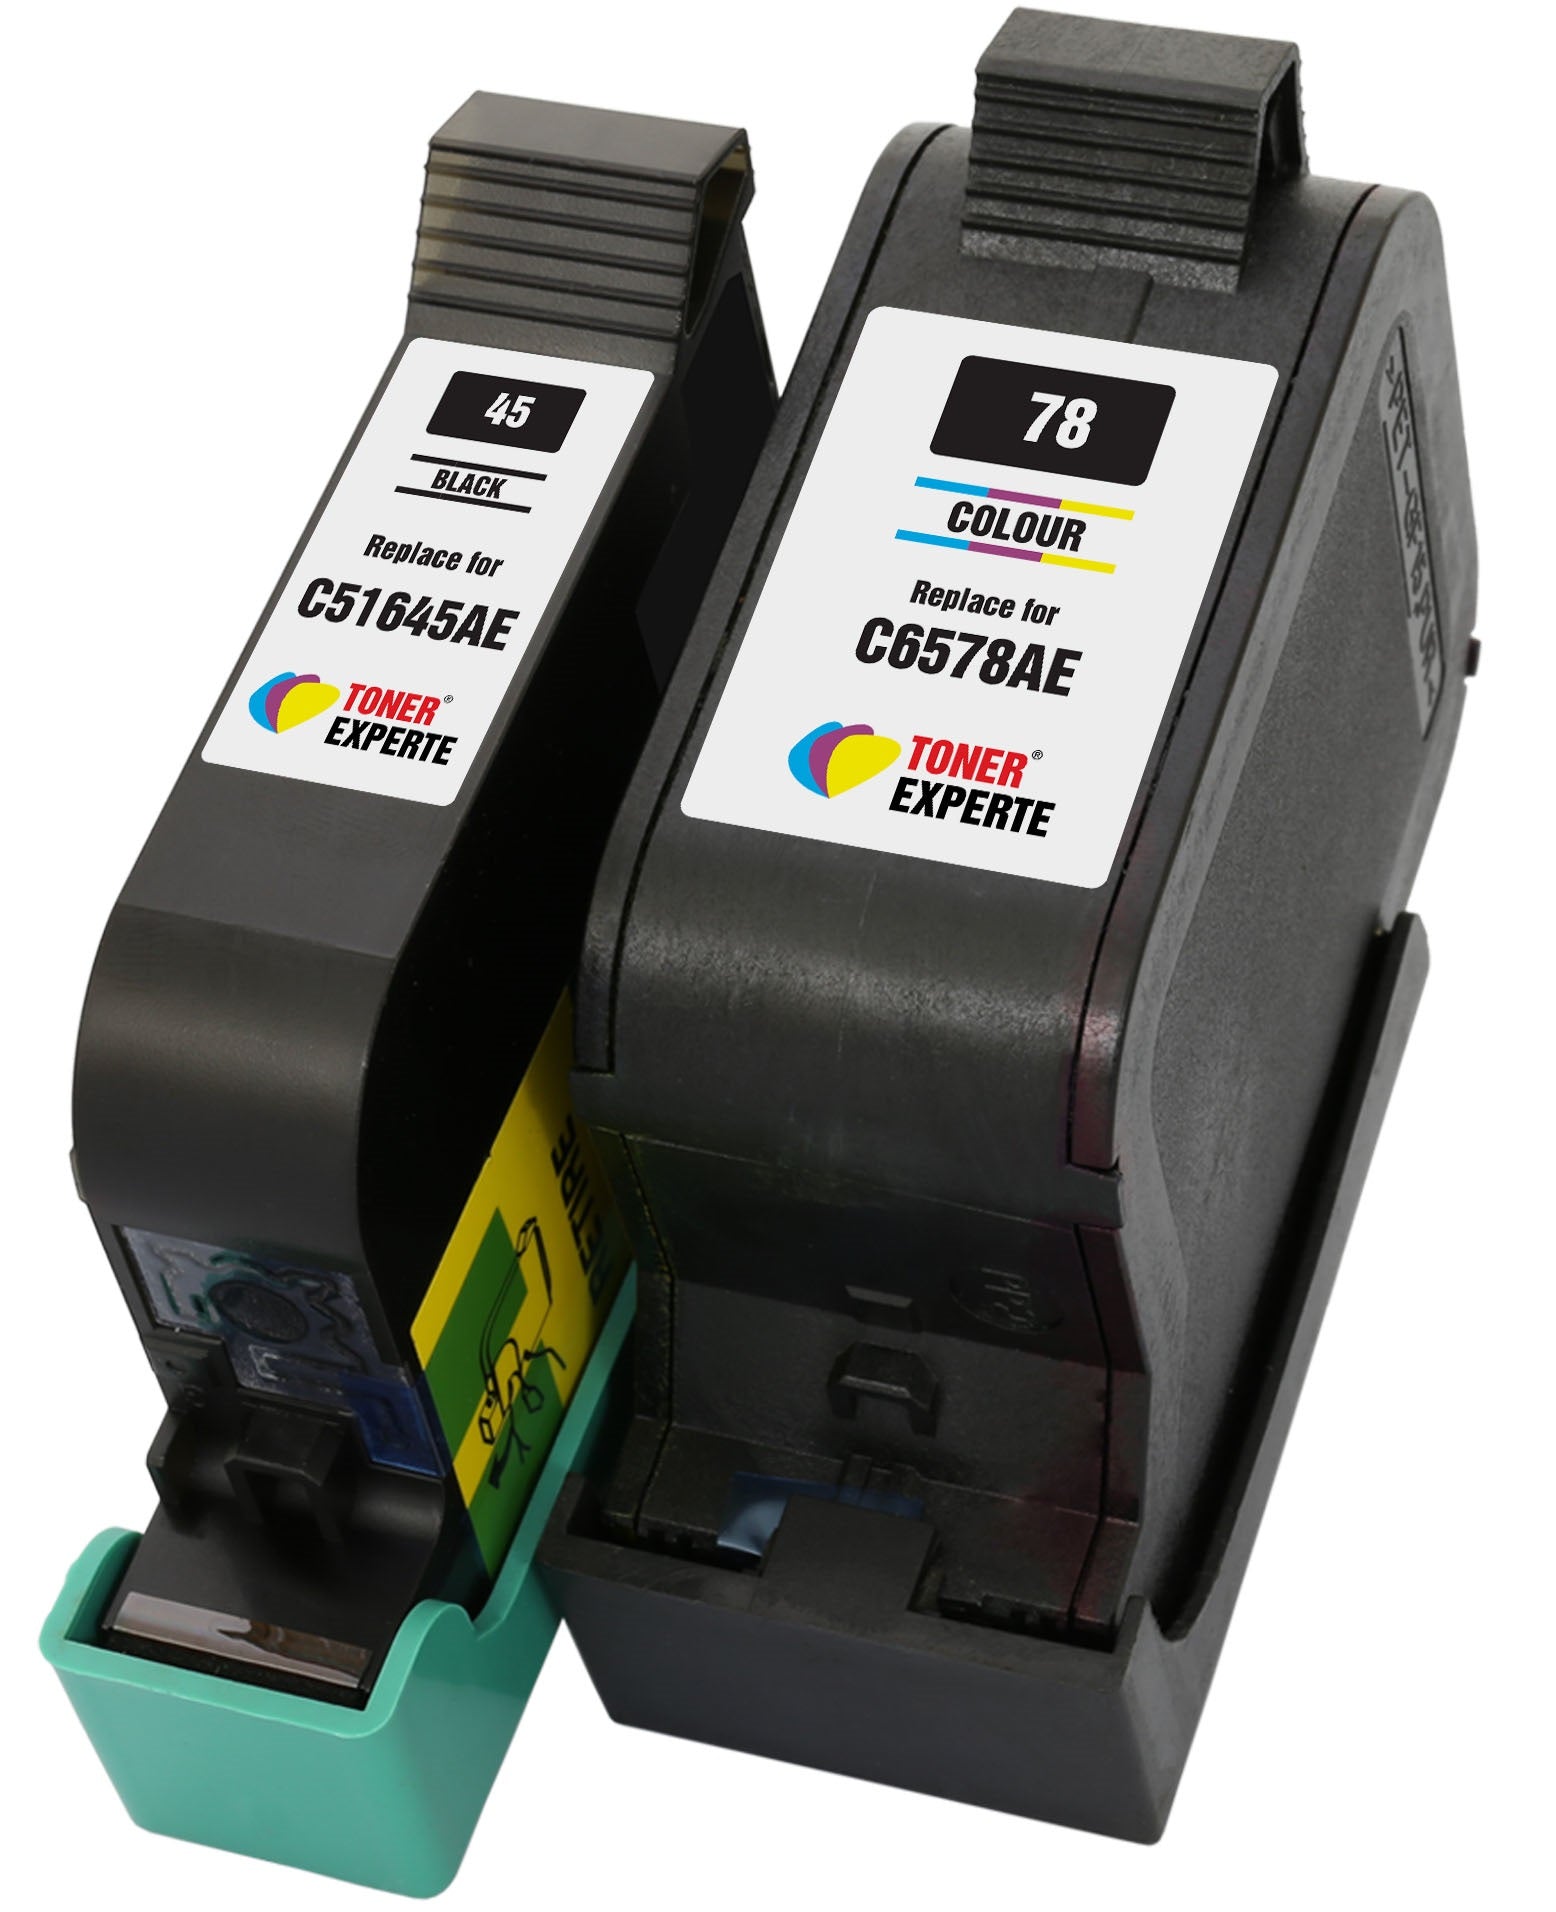 Compatible Ink Cartridges Replacement for HP 45 HP 78 51645AE C6578AE - Toner Experte